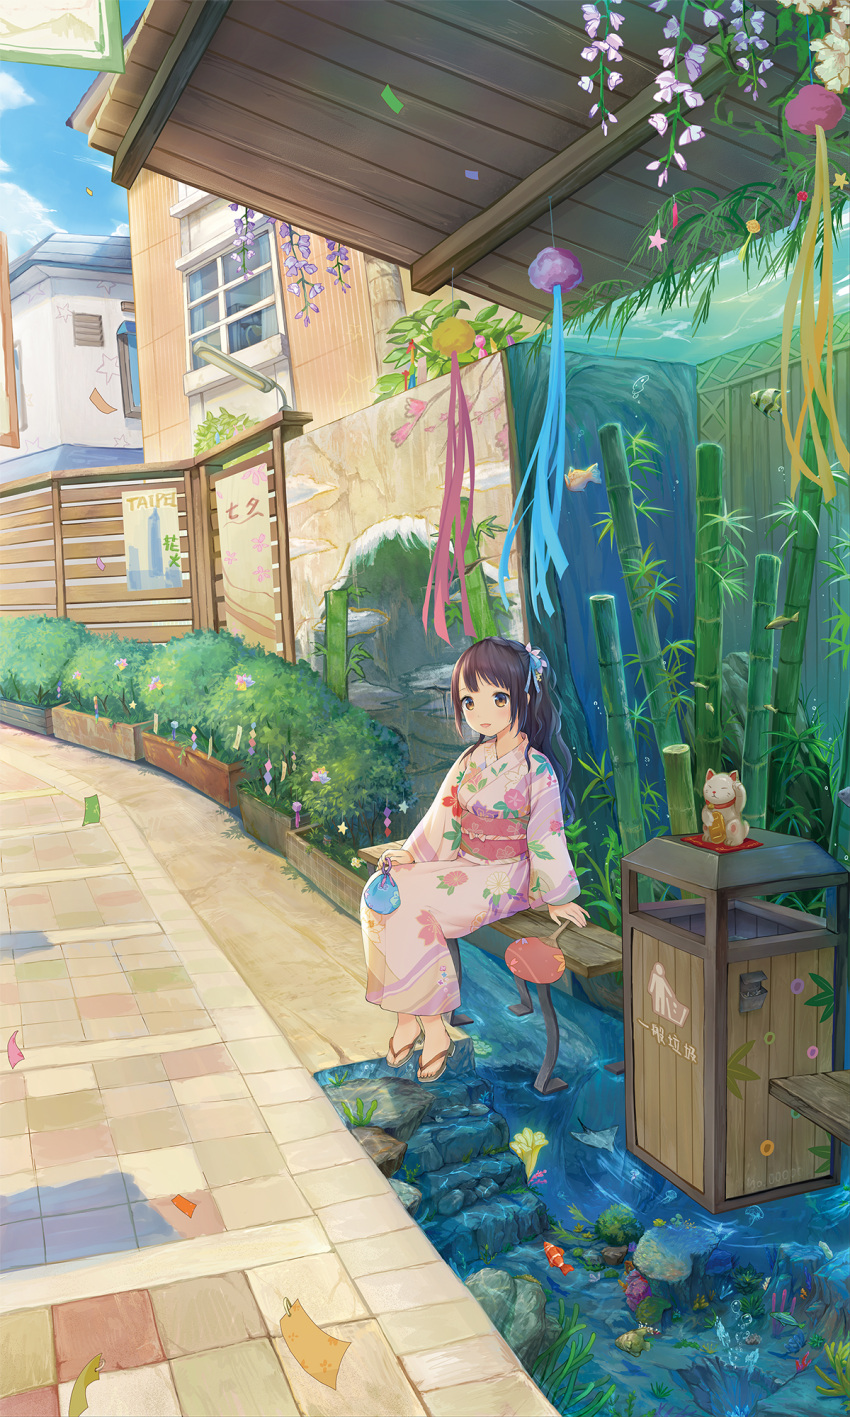 1girl air_bubble angelfish balloon bamboo bench brown_eyes brown_hair building bush clownfish coral fan fish floral_print flower fluorescent_lamp hair_ornament highres holding japanese_clothes jellyfish kimono leaf long_hair long_sleeves looking_at_viewer maneki-neko mural obi original outdoors paper_fan parted_lips pavement petals plant ponytail poster_(object) potted_plant print_kimono road sandals sash sayika scenery seaweed sett sitting slippers smile solo stingray streamers tanzaku trash_can uchiwa wall water window wisteria wooden_wall